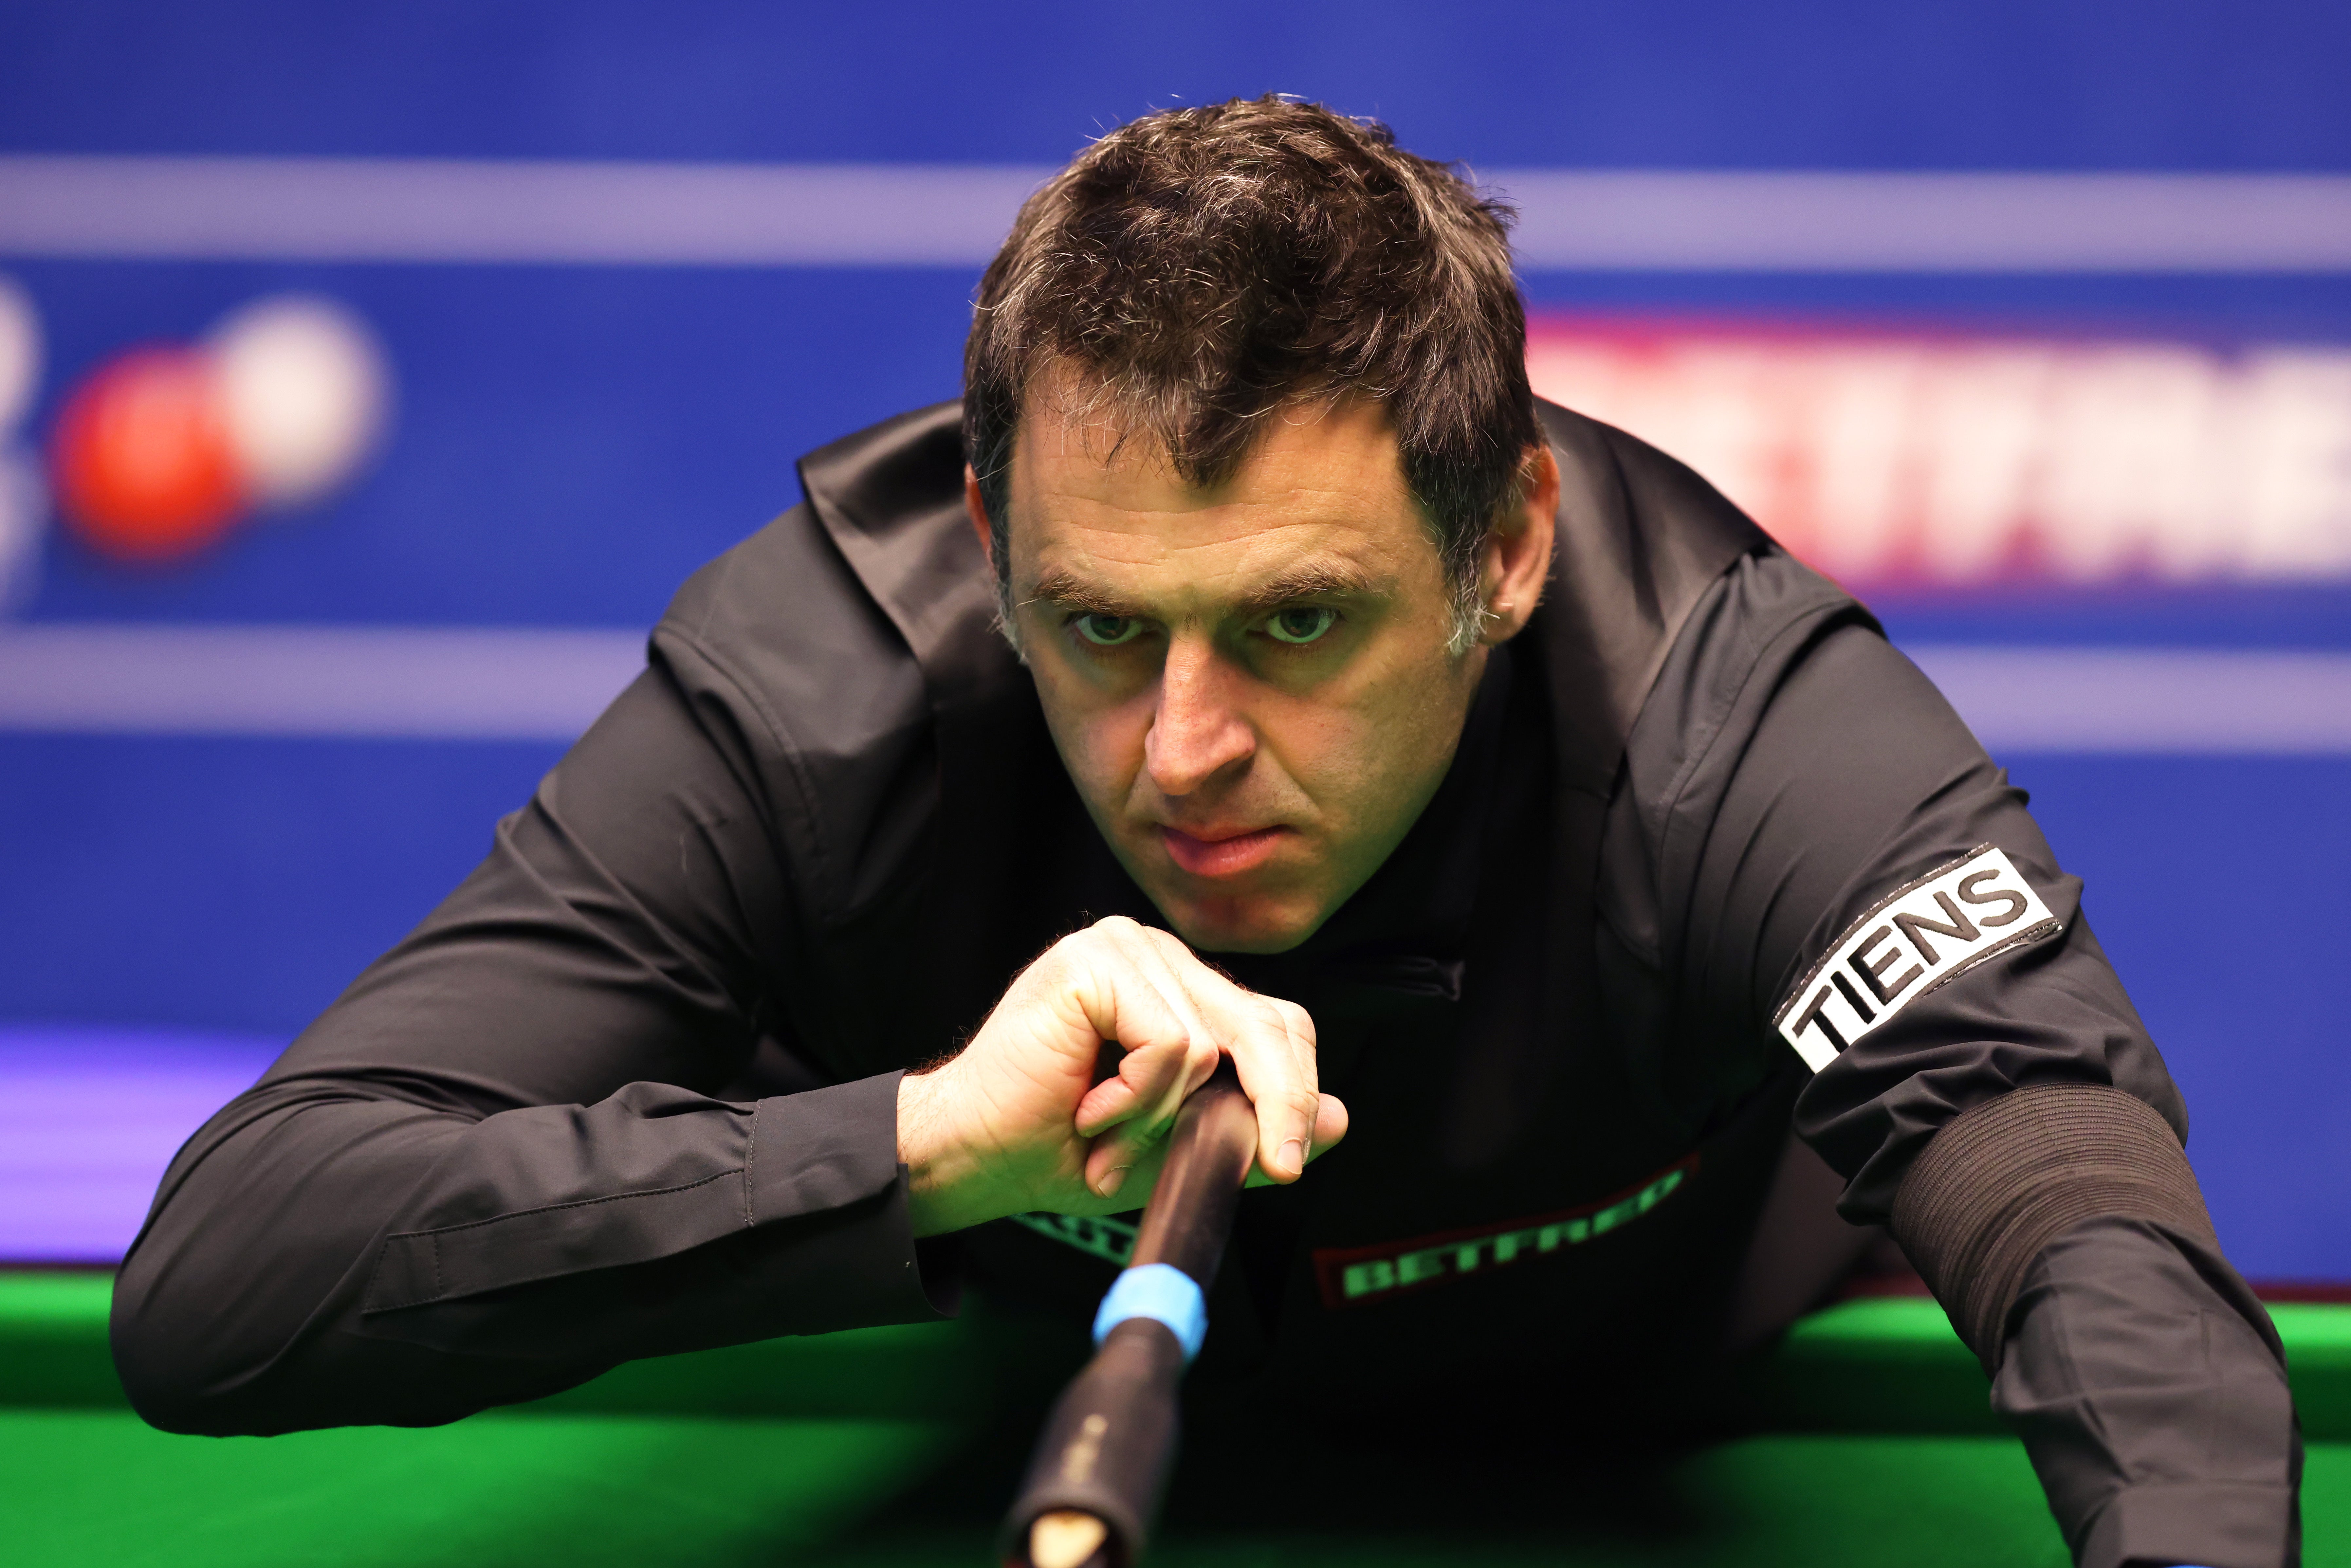 Ronnie OSullivan brushes off chance to equal Stephen Hendrys snooker world title haul The Independent